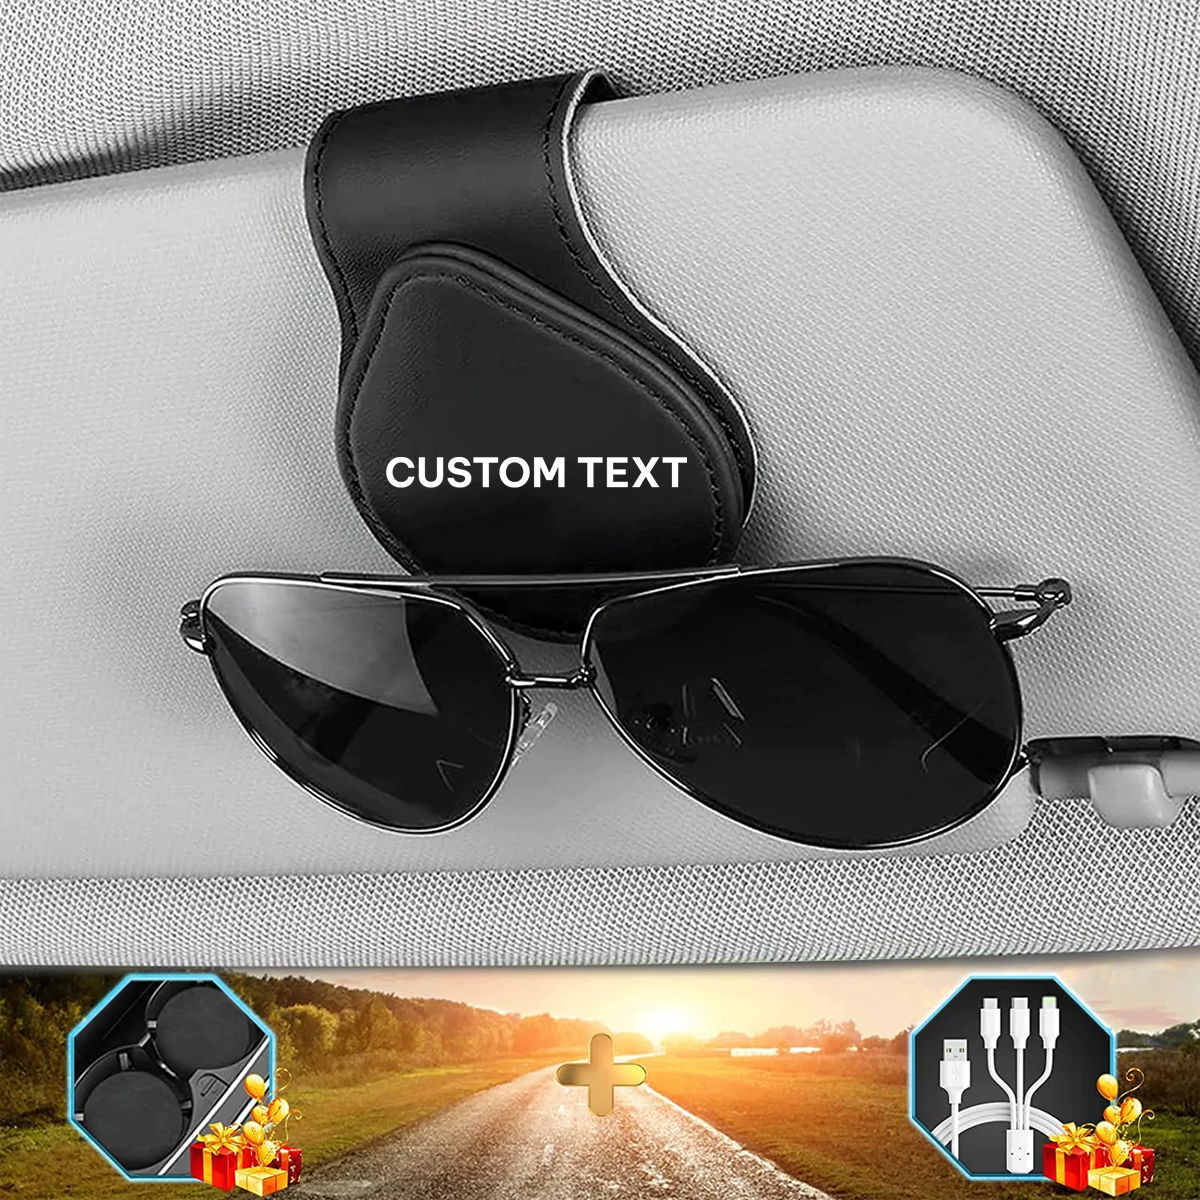 Custom Text and Logo Sunglasses Holder for Car Visor Clips, Fit with Mercedes-Benz, Leather Magnet Adsorption Visor Accessories Car Organizer for Storing Glasses Tickets Eyeglasses Hanger - Delicate Leather